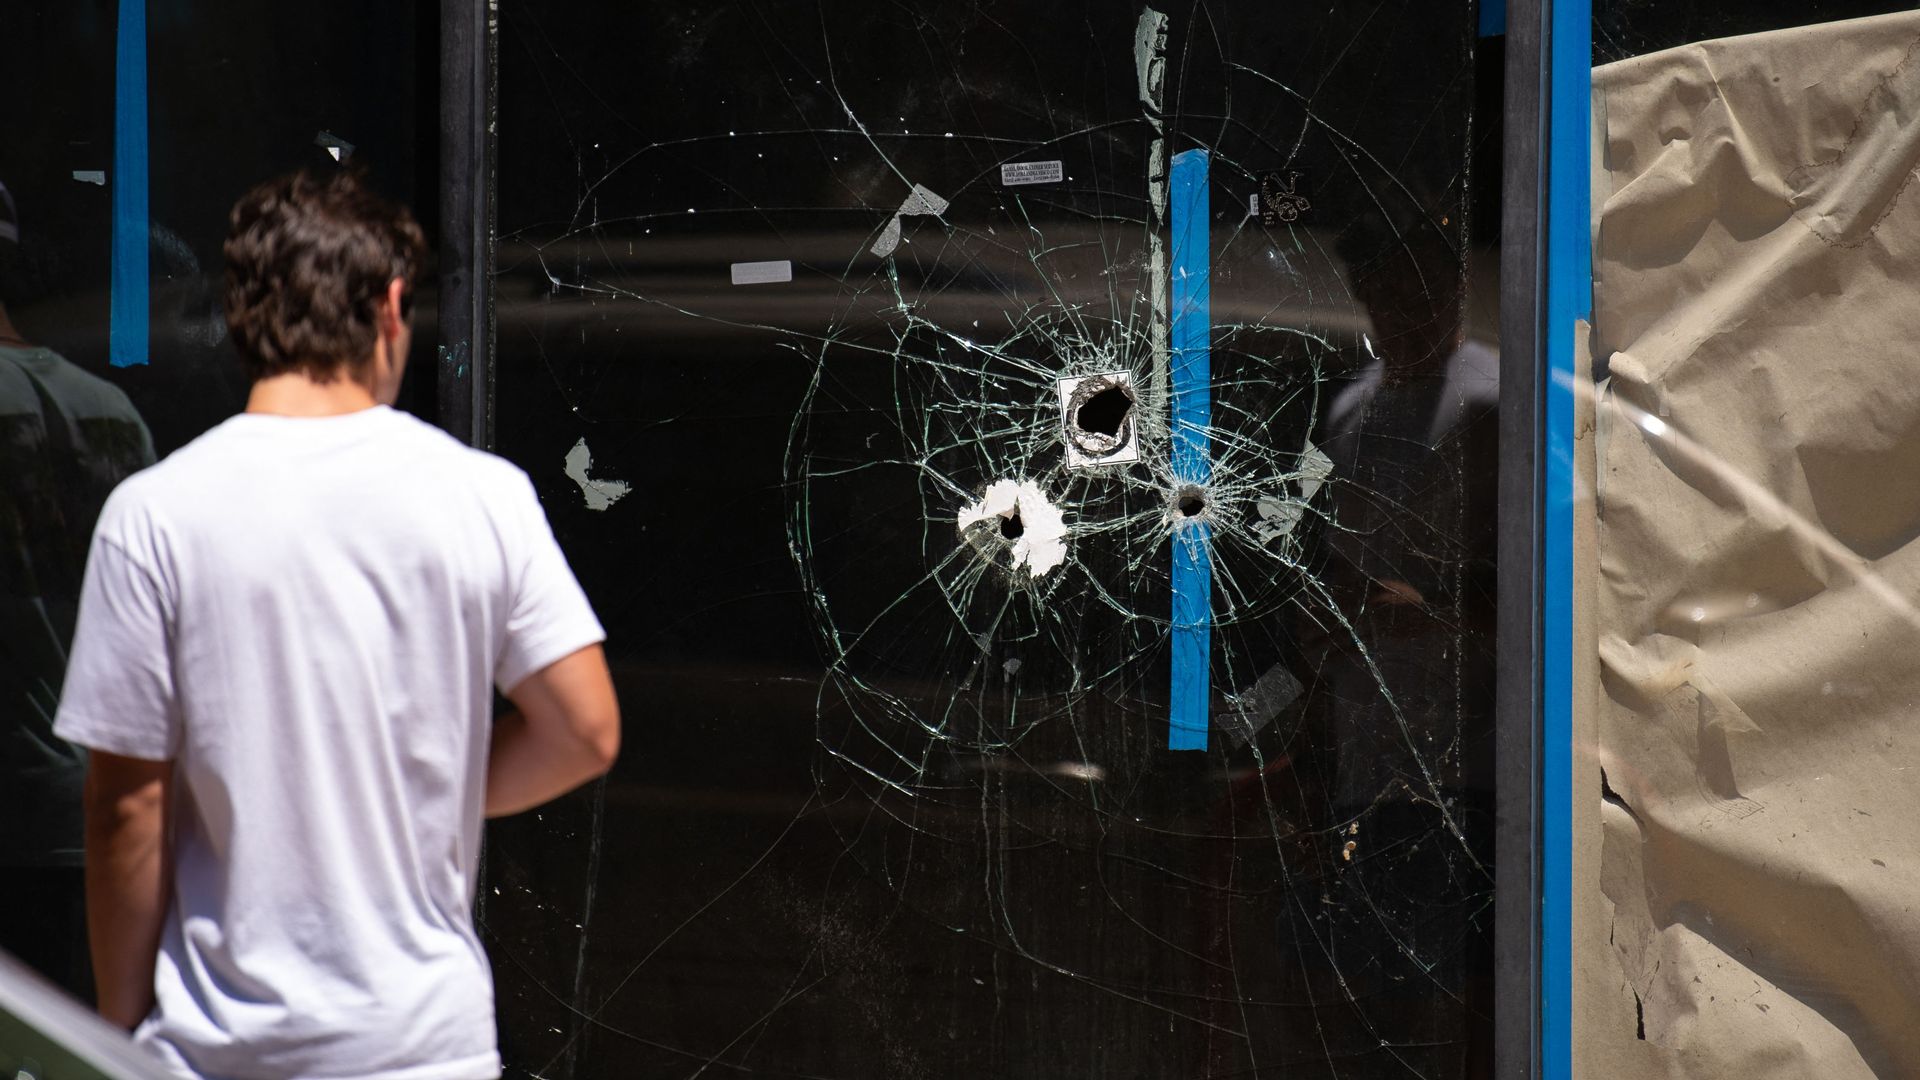 A pedestrian walks past bullet holes in the window of a store front on South Street in Philadelphia